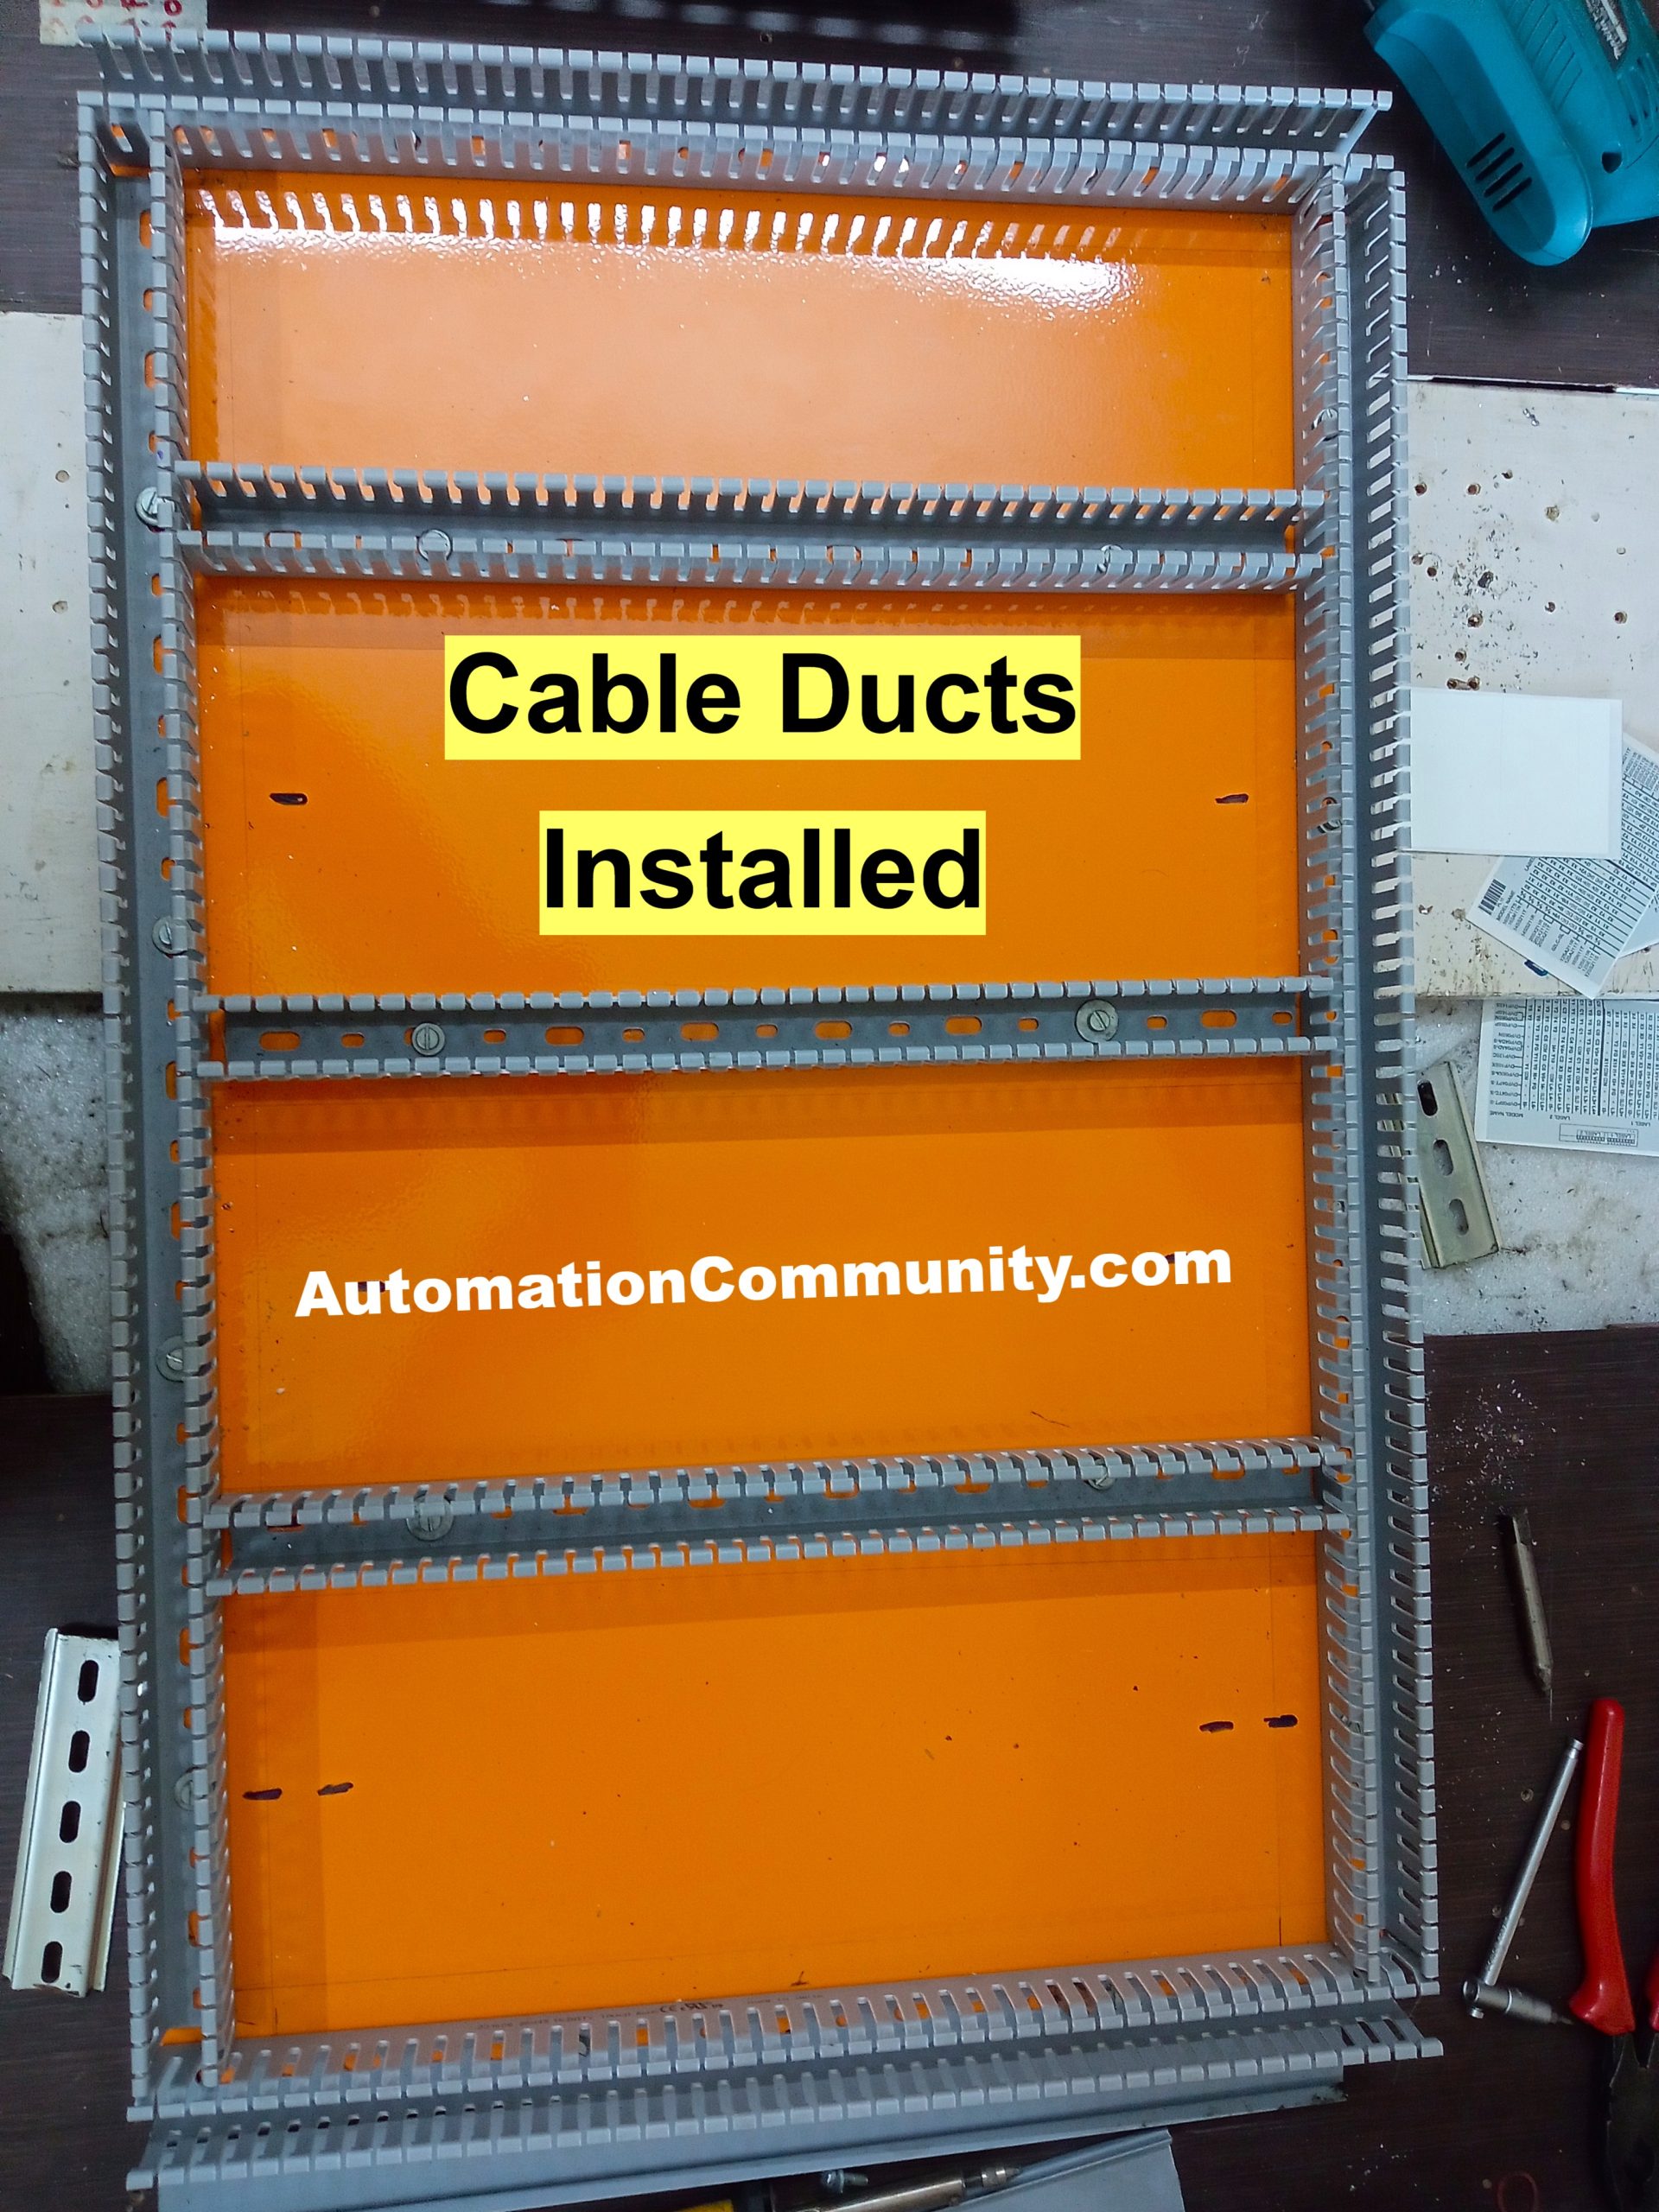 Cable Ducts Installed in PLC Cabinet